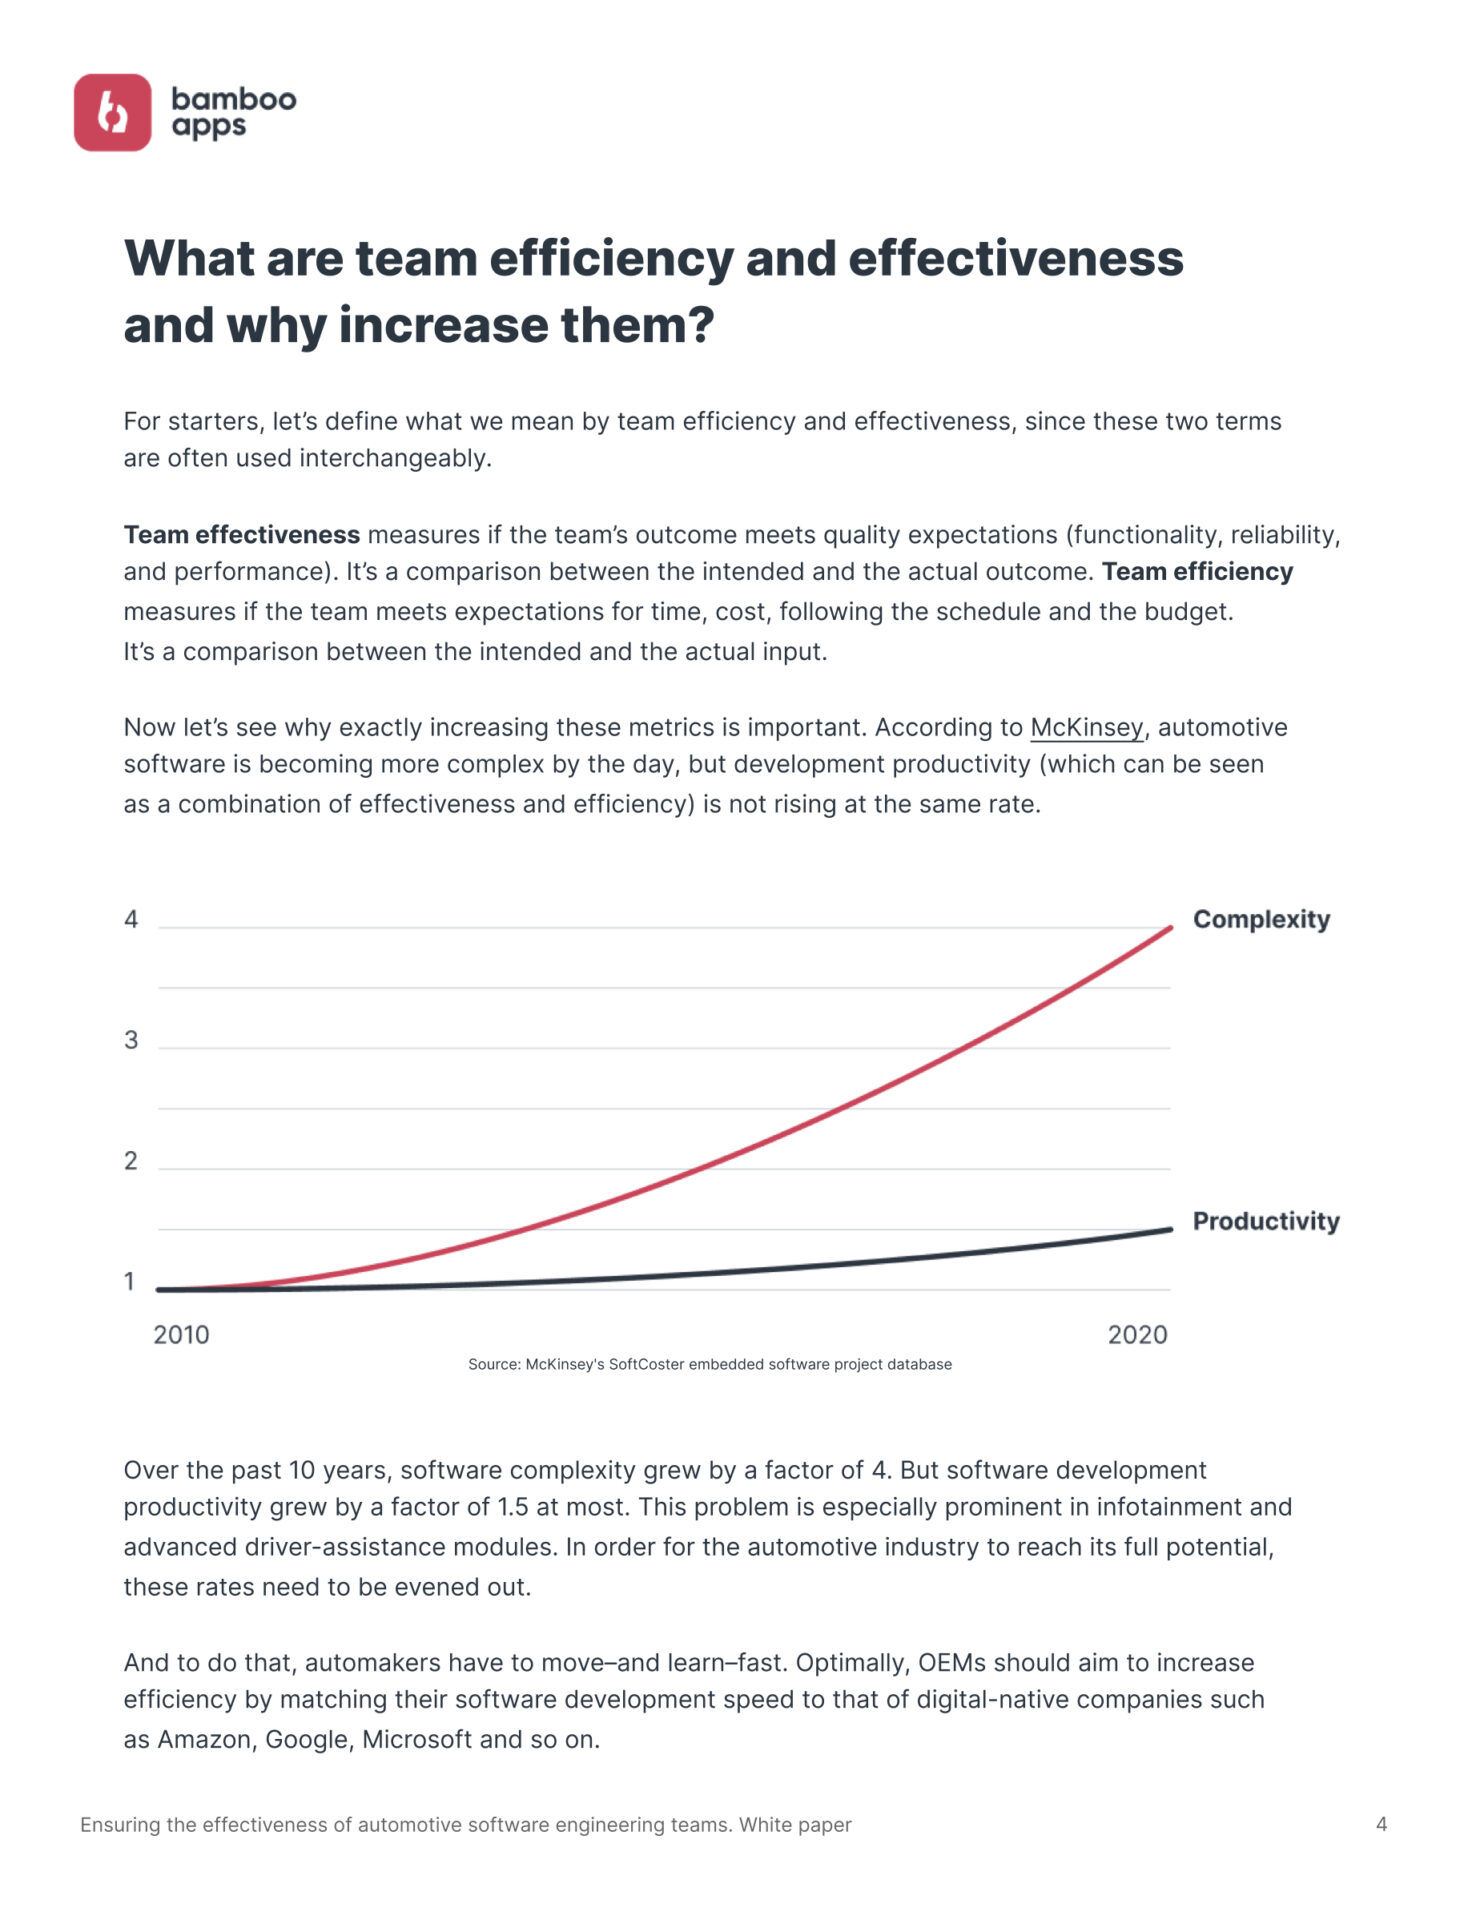 The effectiveness of automotive software engineering teams | What are team efficiency and effectiveness and why increase them